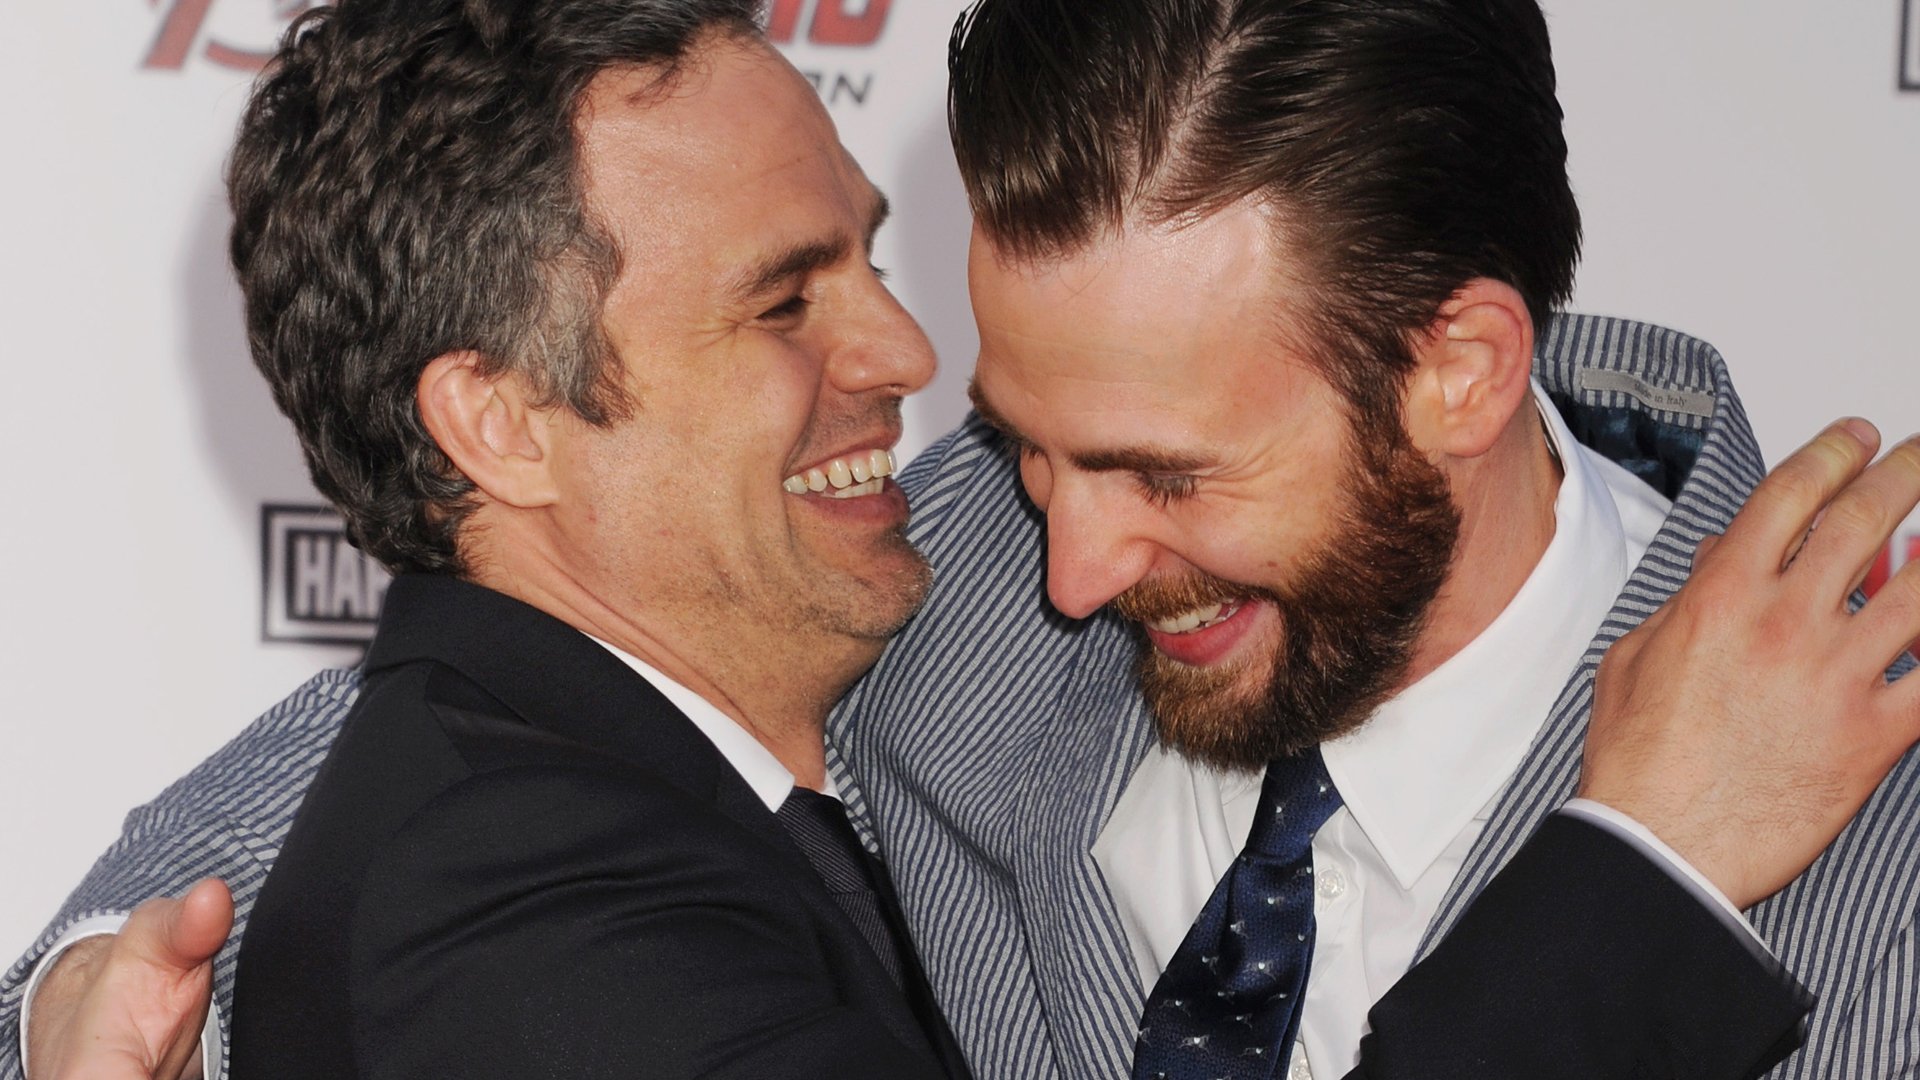 Actors Mark Ruffalo (L) and Chris Evans arrive at the Marvel's 'Avengers: Age Of Ultron' - Los Angeles Premiere at Dolby Theatre on April 13, 2015 in Hollywood, California. 